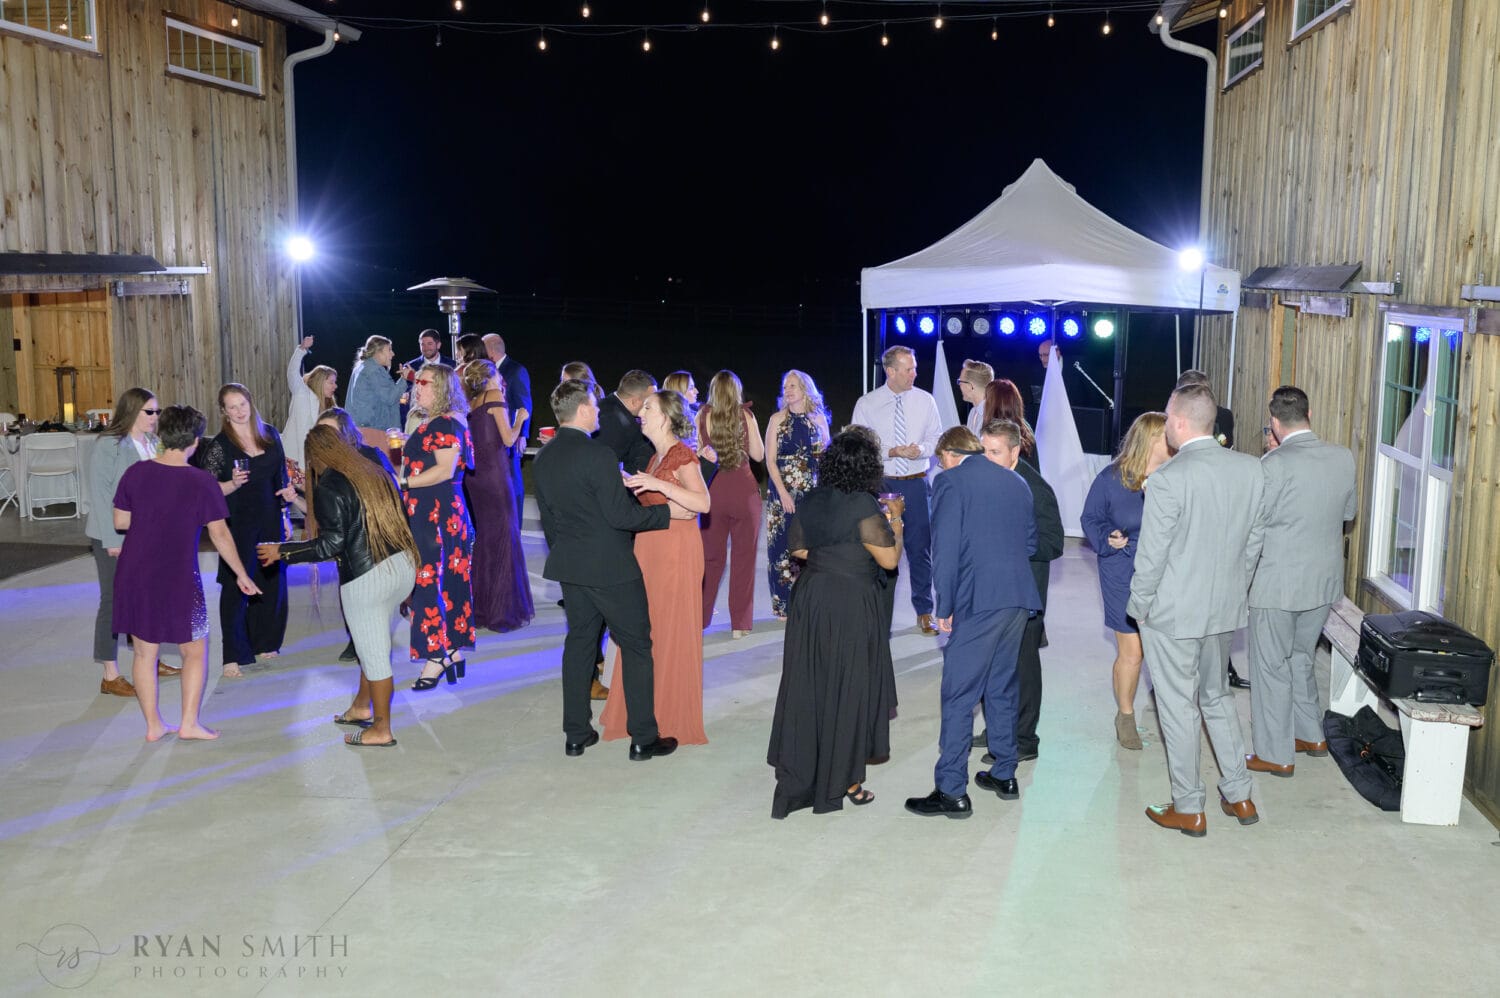 Fun dancing during the reception - The Blessed Barn